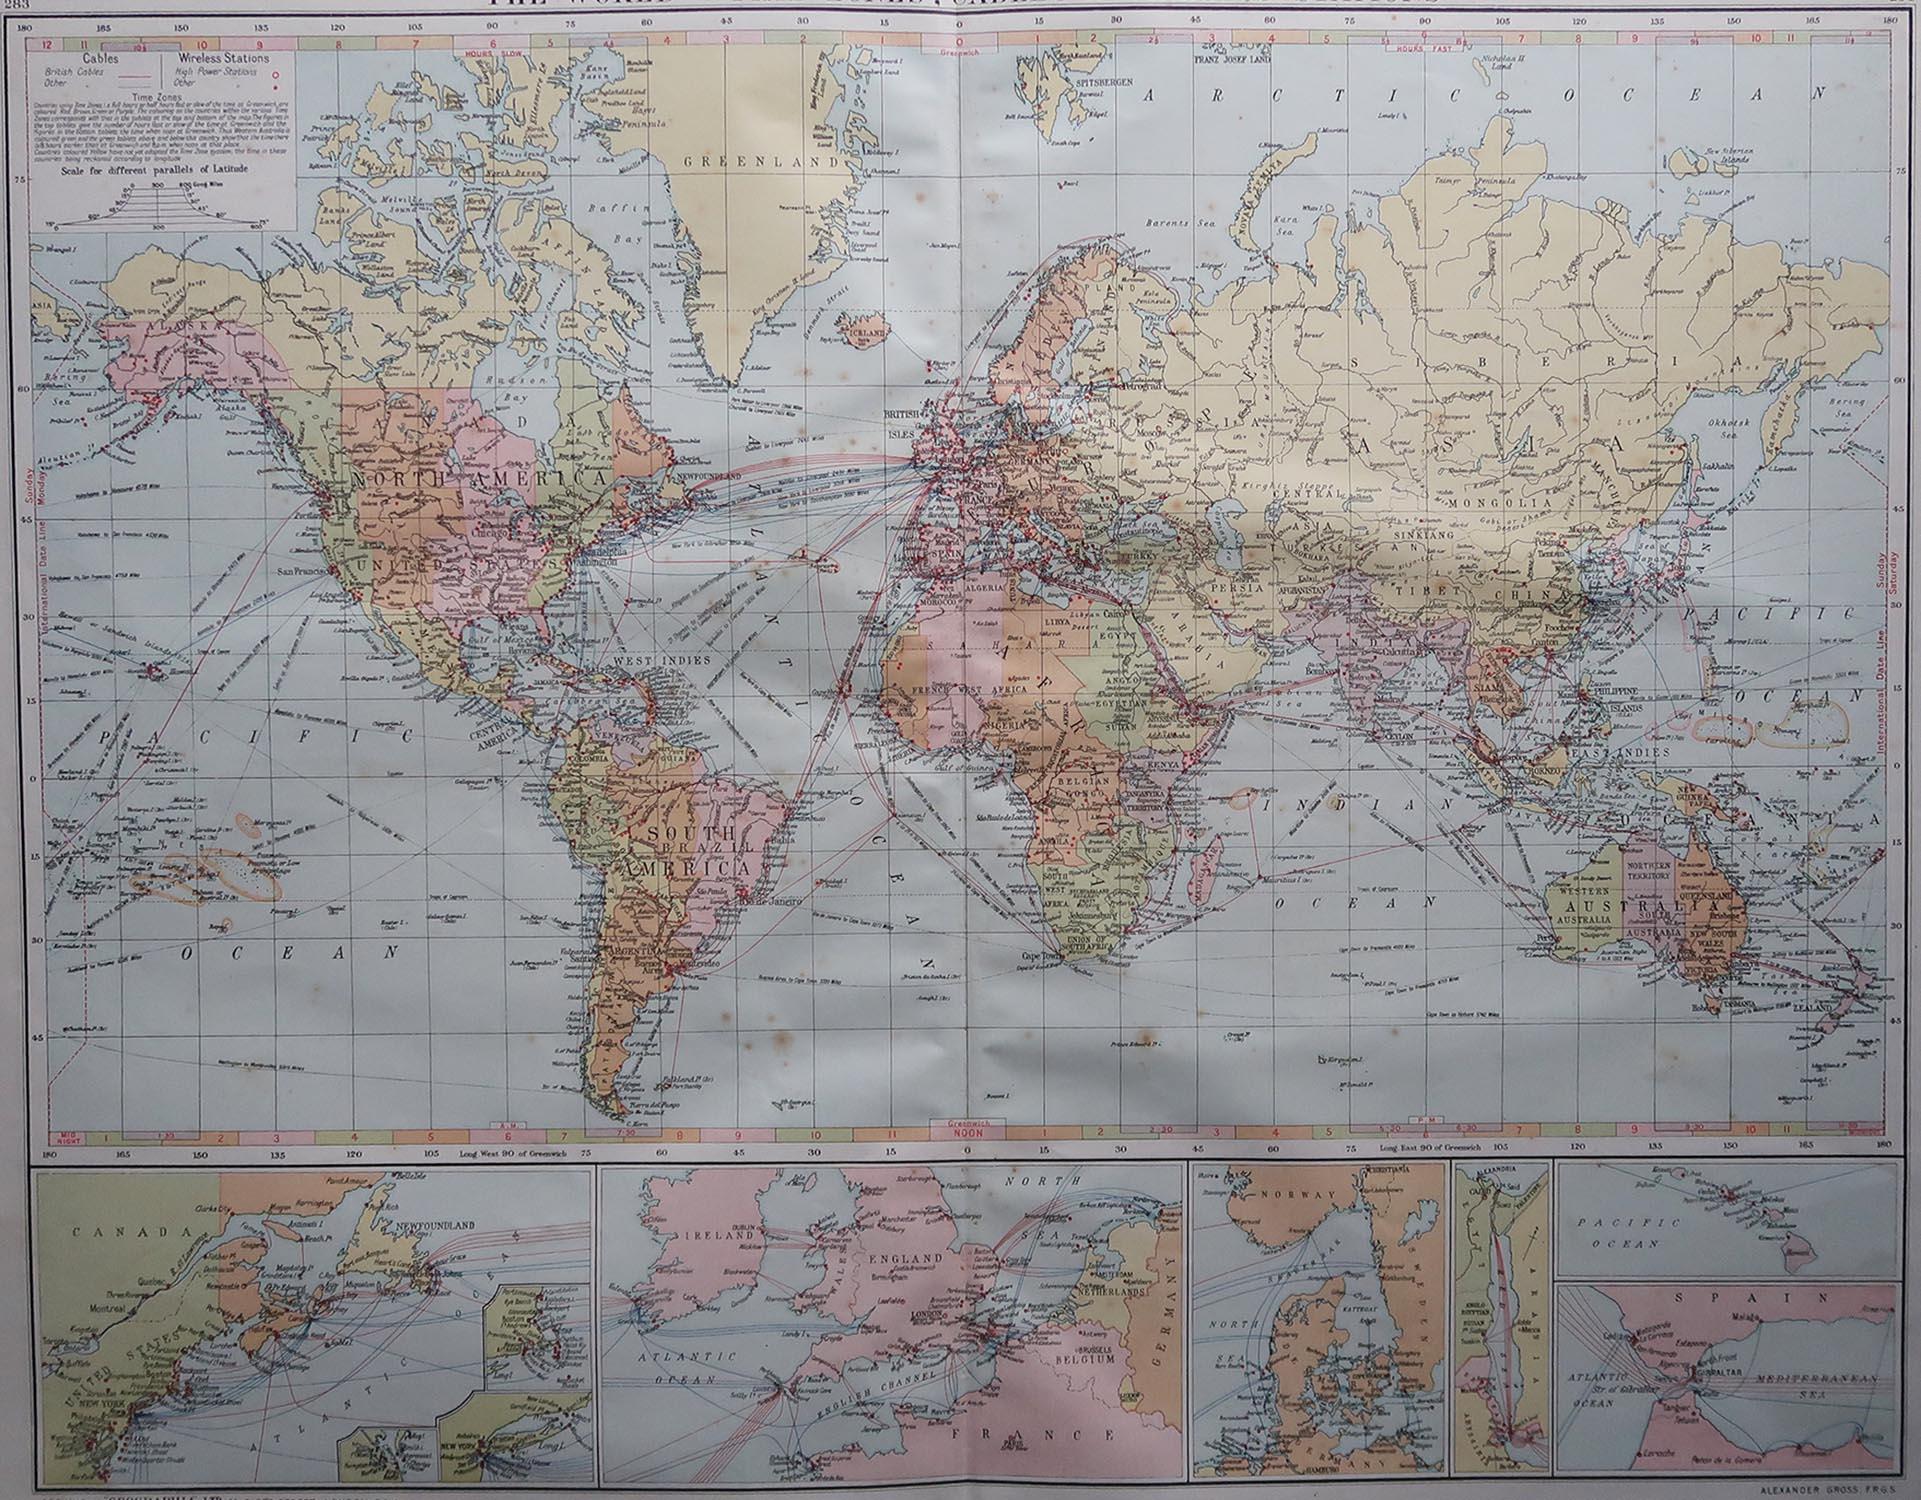 Great map of The World

Original color.

Good condition / minor foxing

Published by Alexander Gross

Unframed.








